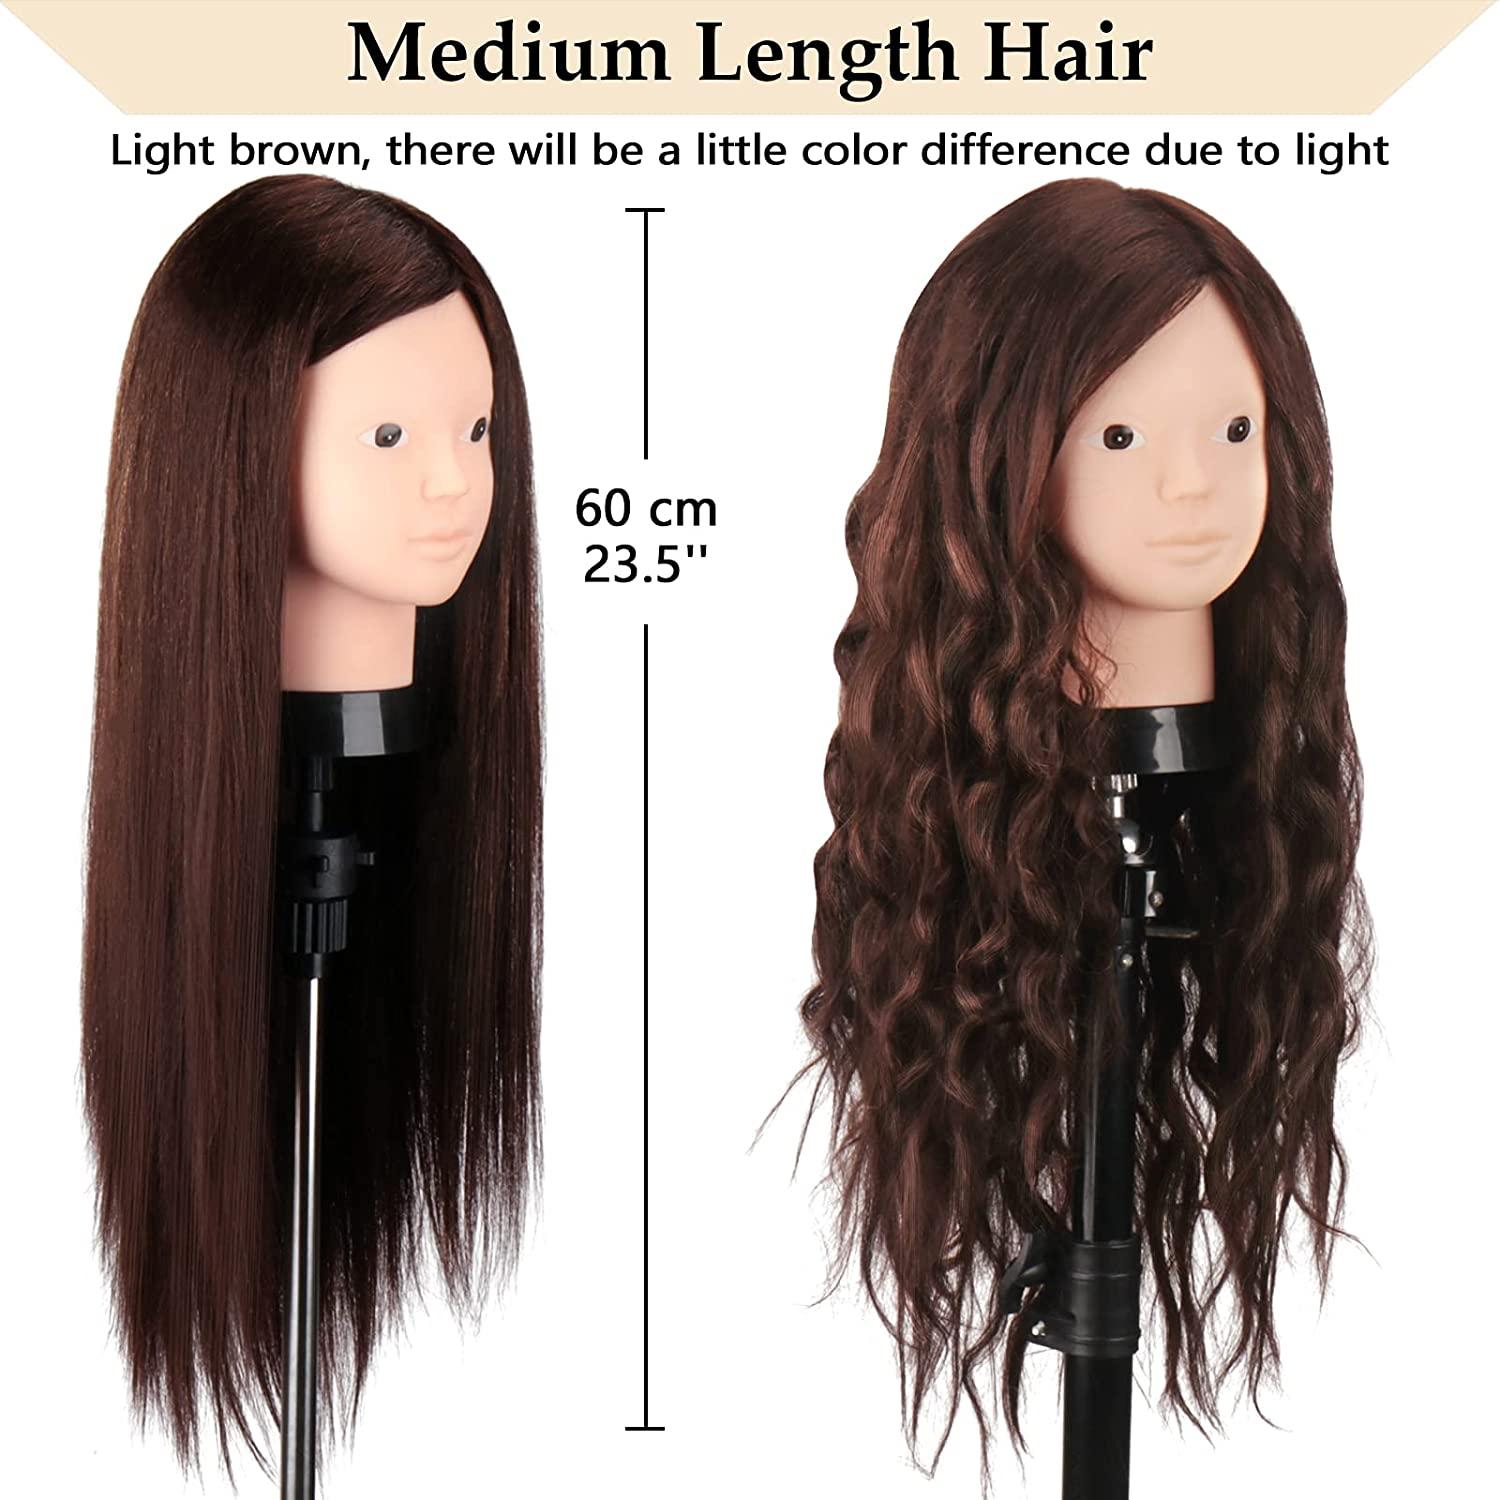 Beauty Star 23.5 Mannequin Head with 80% Real Human Hair, Manikin Doll Head  with Table Clamp Holder + DIY Hair Styling Braid Set, Cosmetology Make-up  Hairdressing Training Head (Dark Brown)